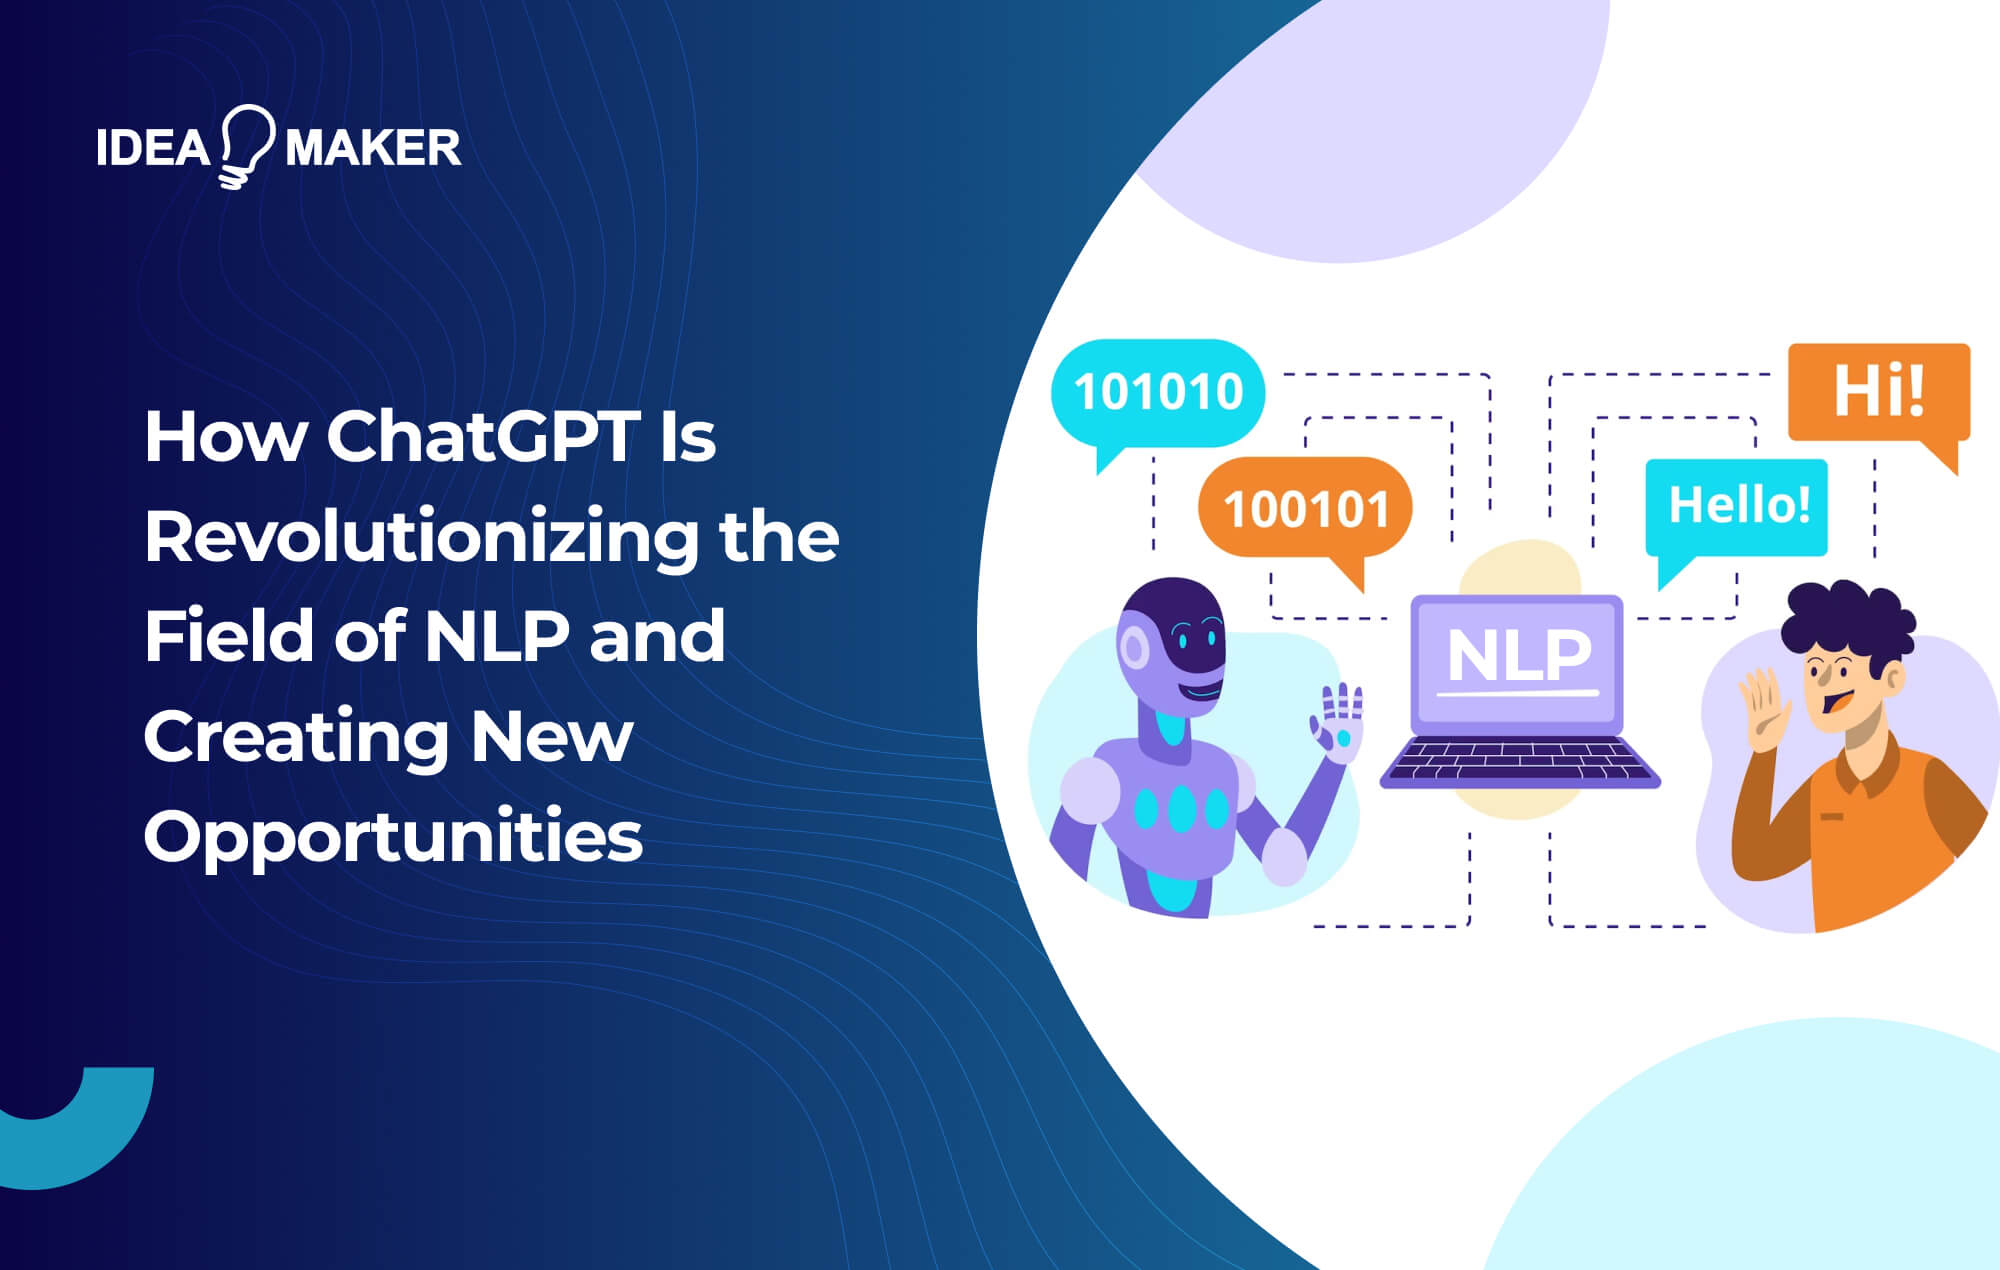 How ChatGPT is revolutionizing the field of NLP and creating new opportunities